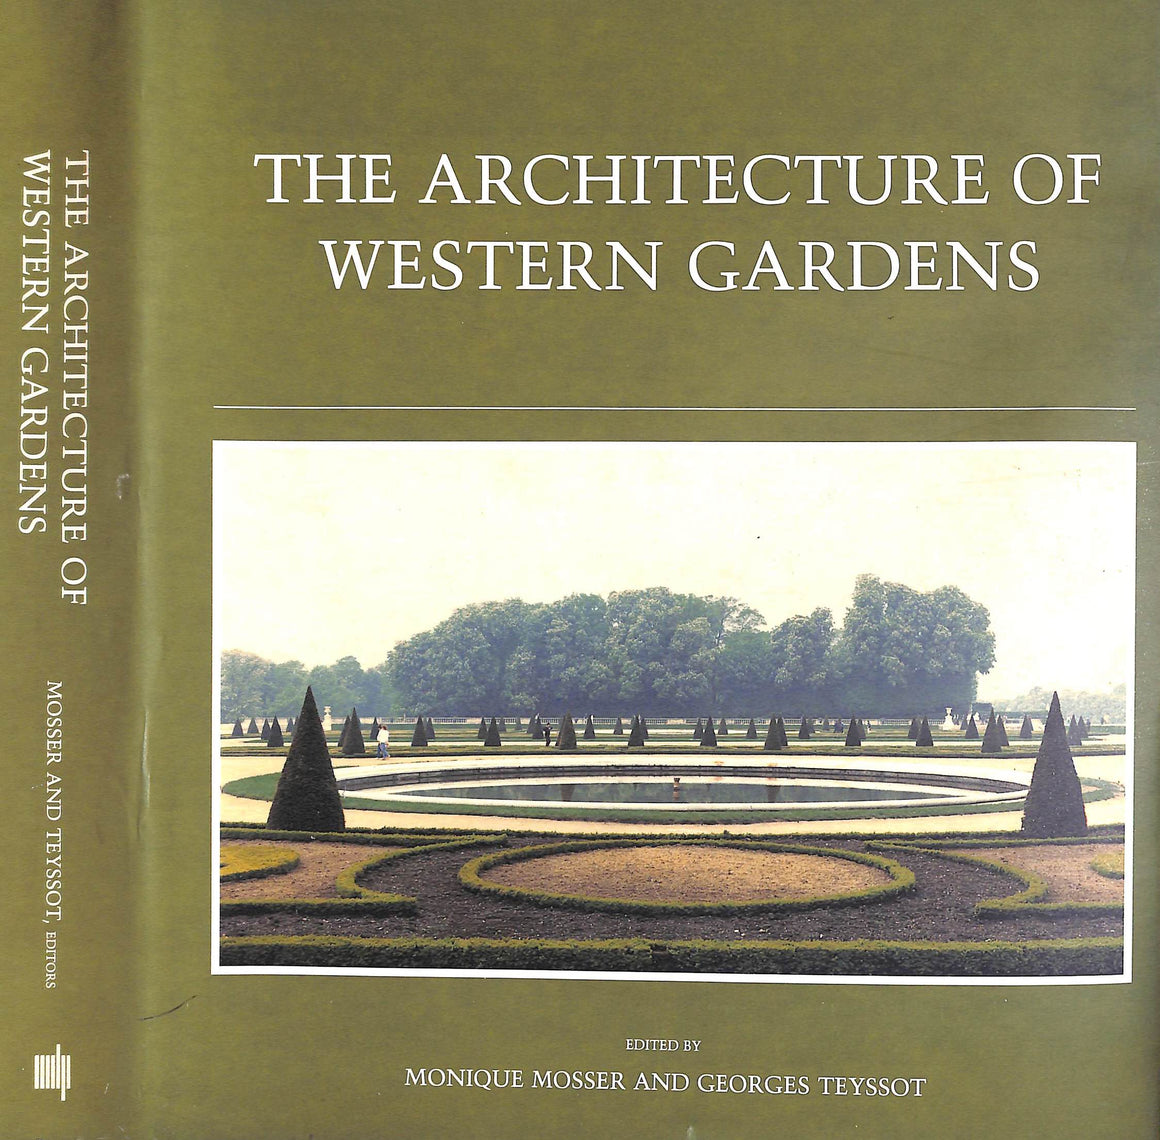 "The Architecture Of Western Gardens A Design History From The Renaissance To The Present Day" 1991 MOSSER, Monique, TEYSSOT, Georges